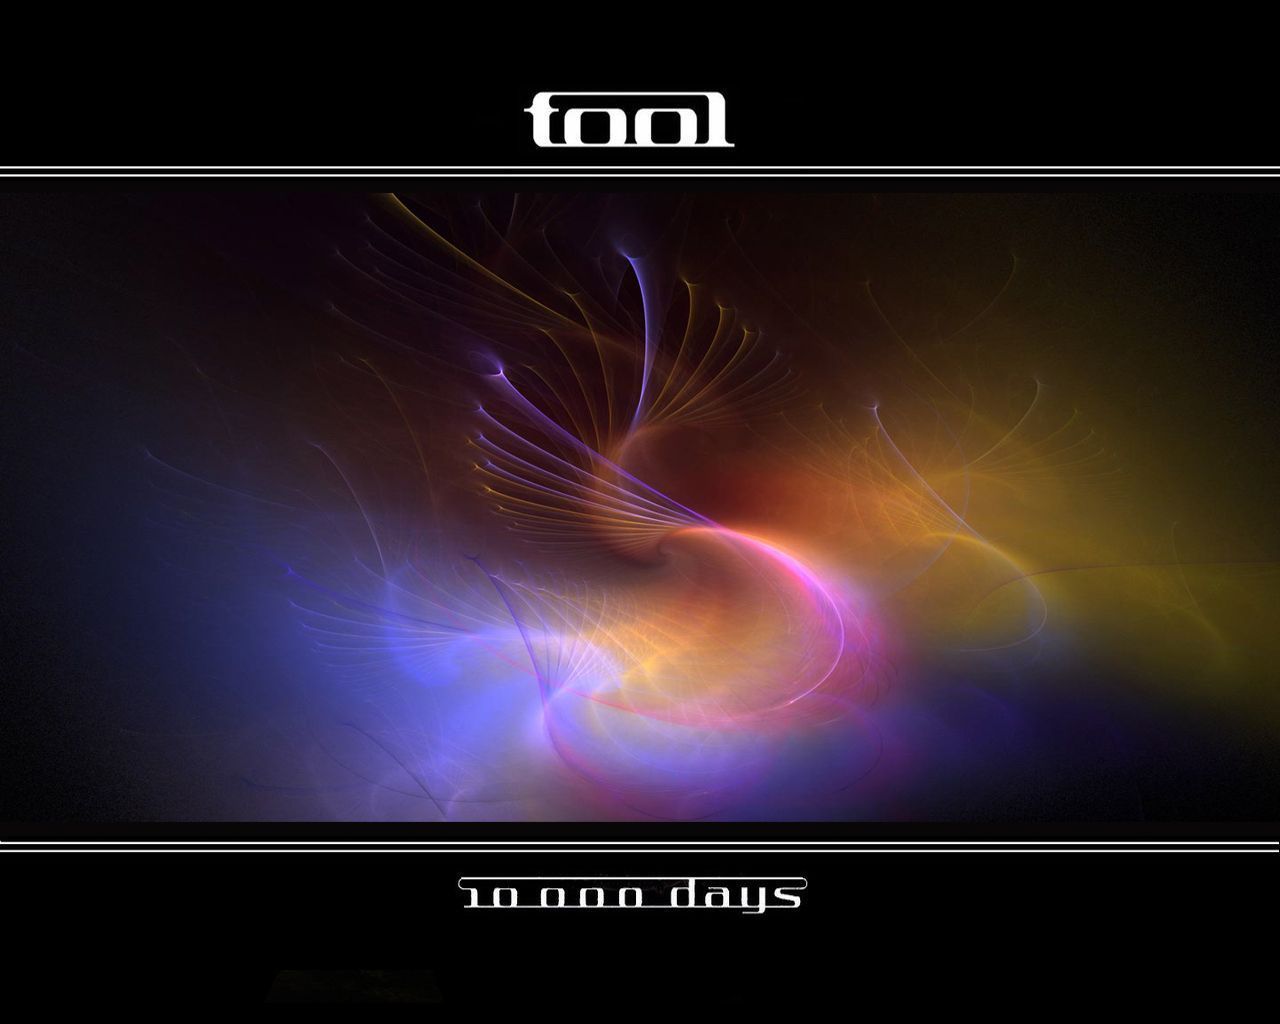 TOOL Wallpaper by tool-band on DeviantArt